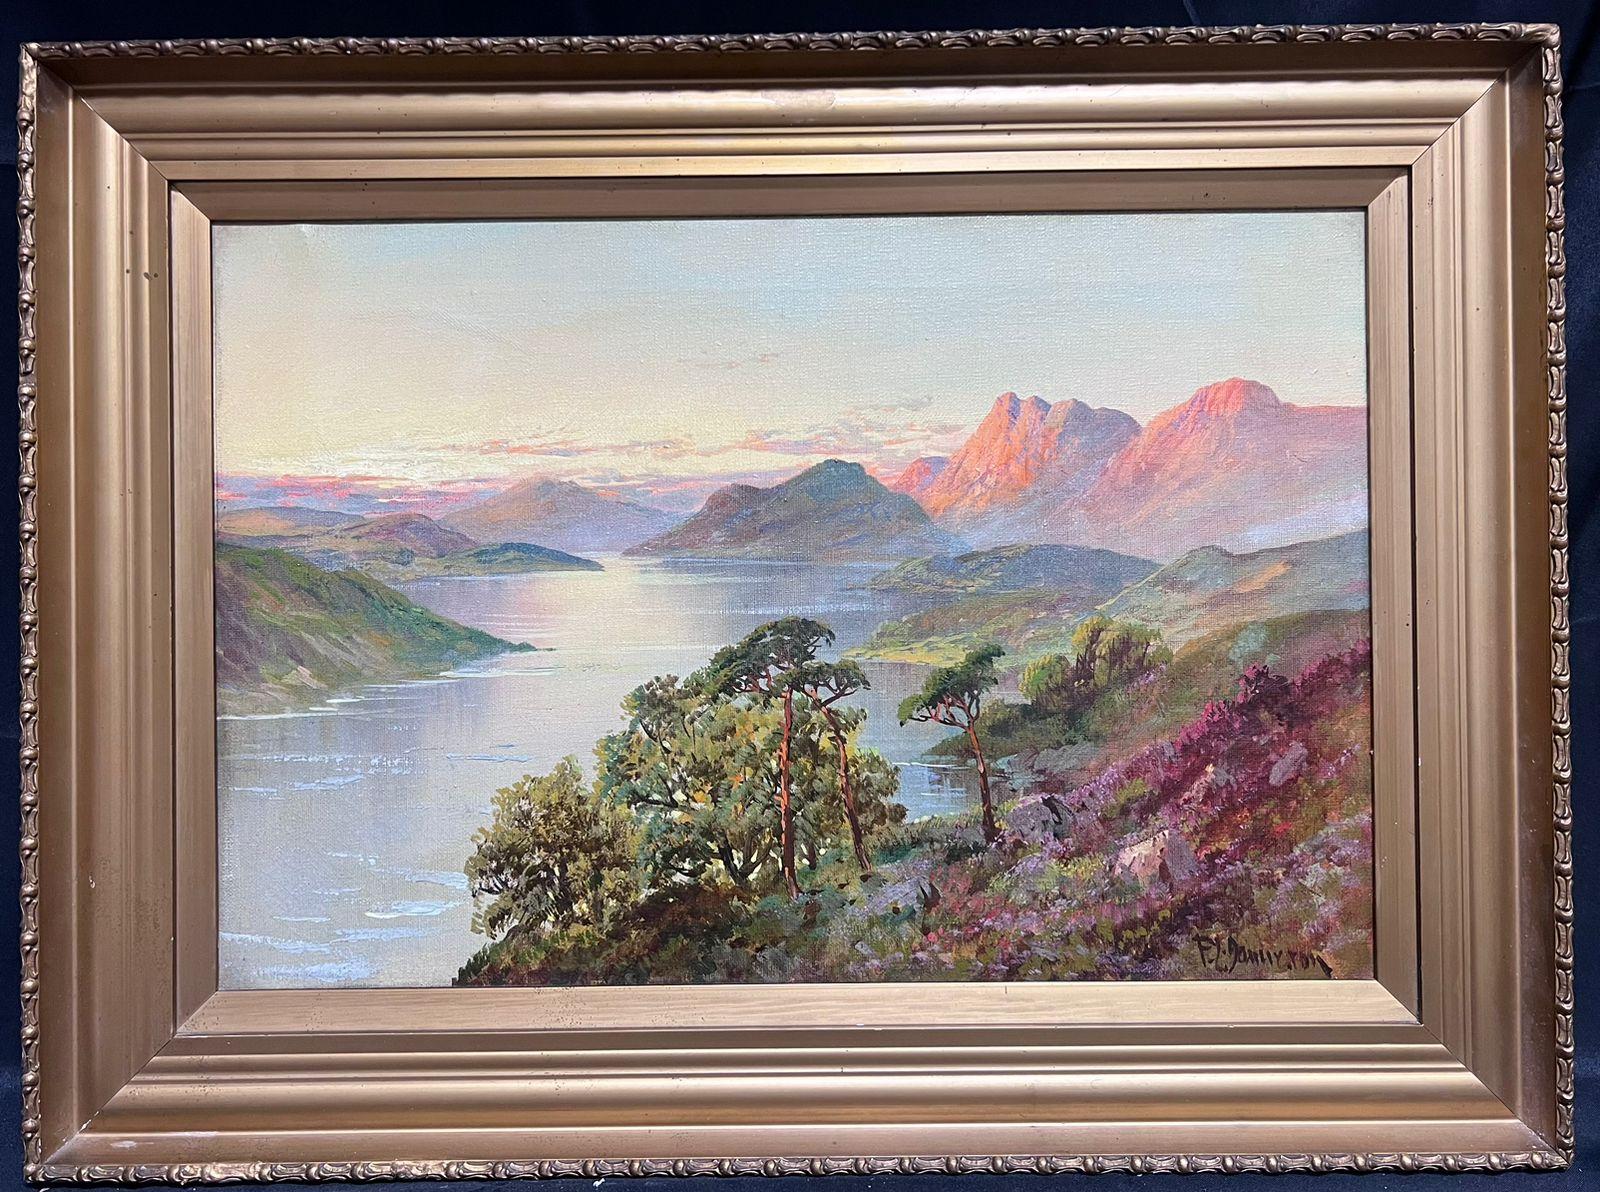 The Highland Loch
signed by F. E. Jamieson (British 1895-1950)
indistinctly titled verso, most likely a loch in the Trossochs region of Argyll. 
oil painting on canvas, framed
framed: 22 x 30 inches
canvas : 16 x 24 inches
provenance: private